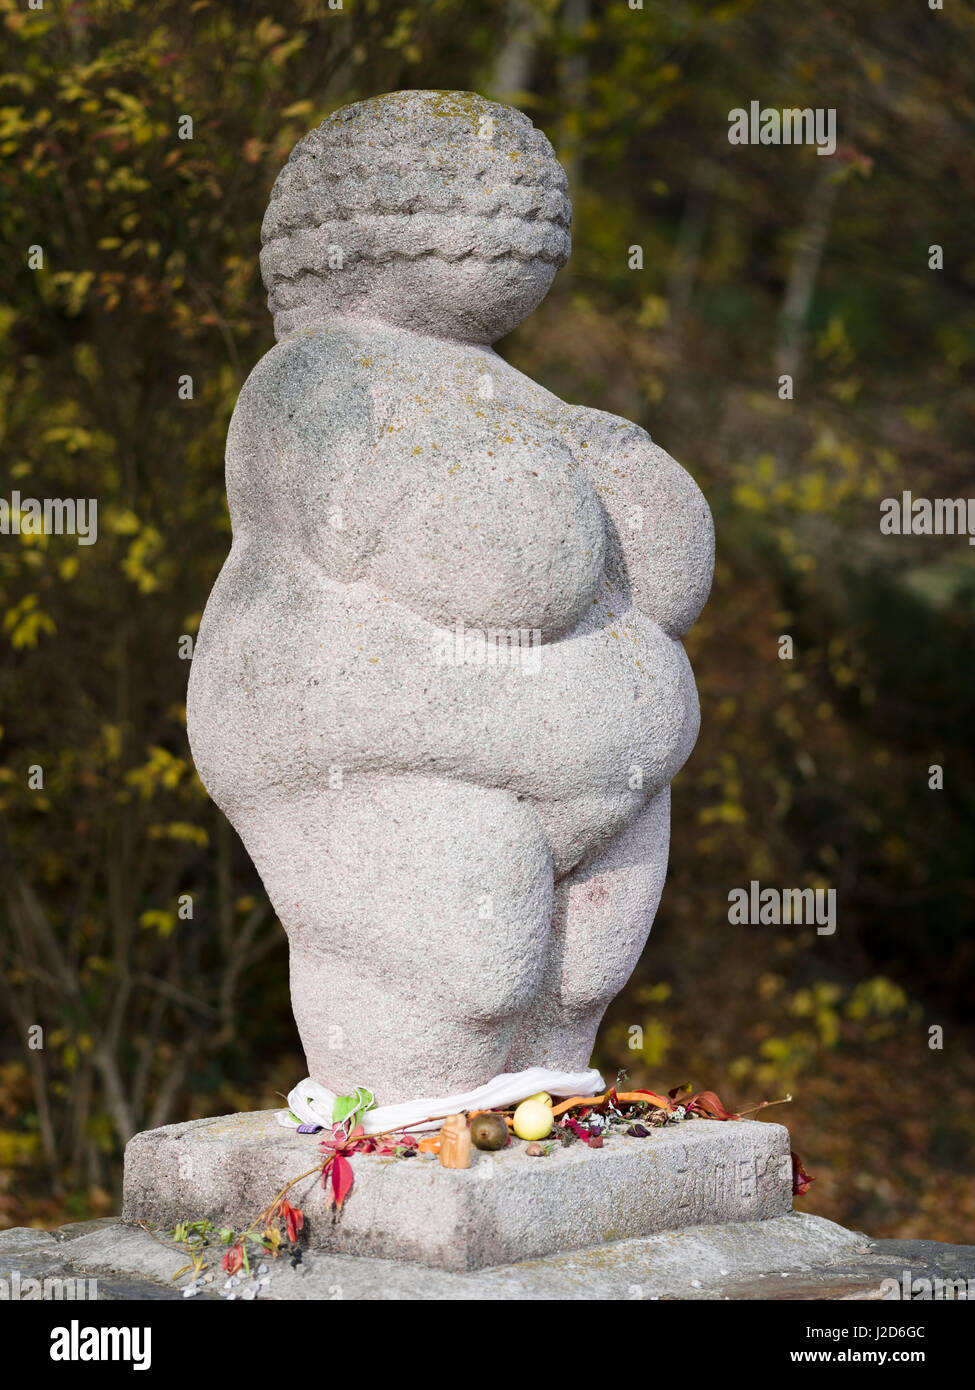 Place of discovery of the Venus von Willendorf (Woman of Willendorf) and a replica commemorating the find. The Wachau is a famous vineyard and listed as Wachau Cultural Landscape as UNESCO World Heritage. Austria (Large format sizes available) Stock Photo